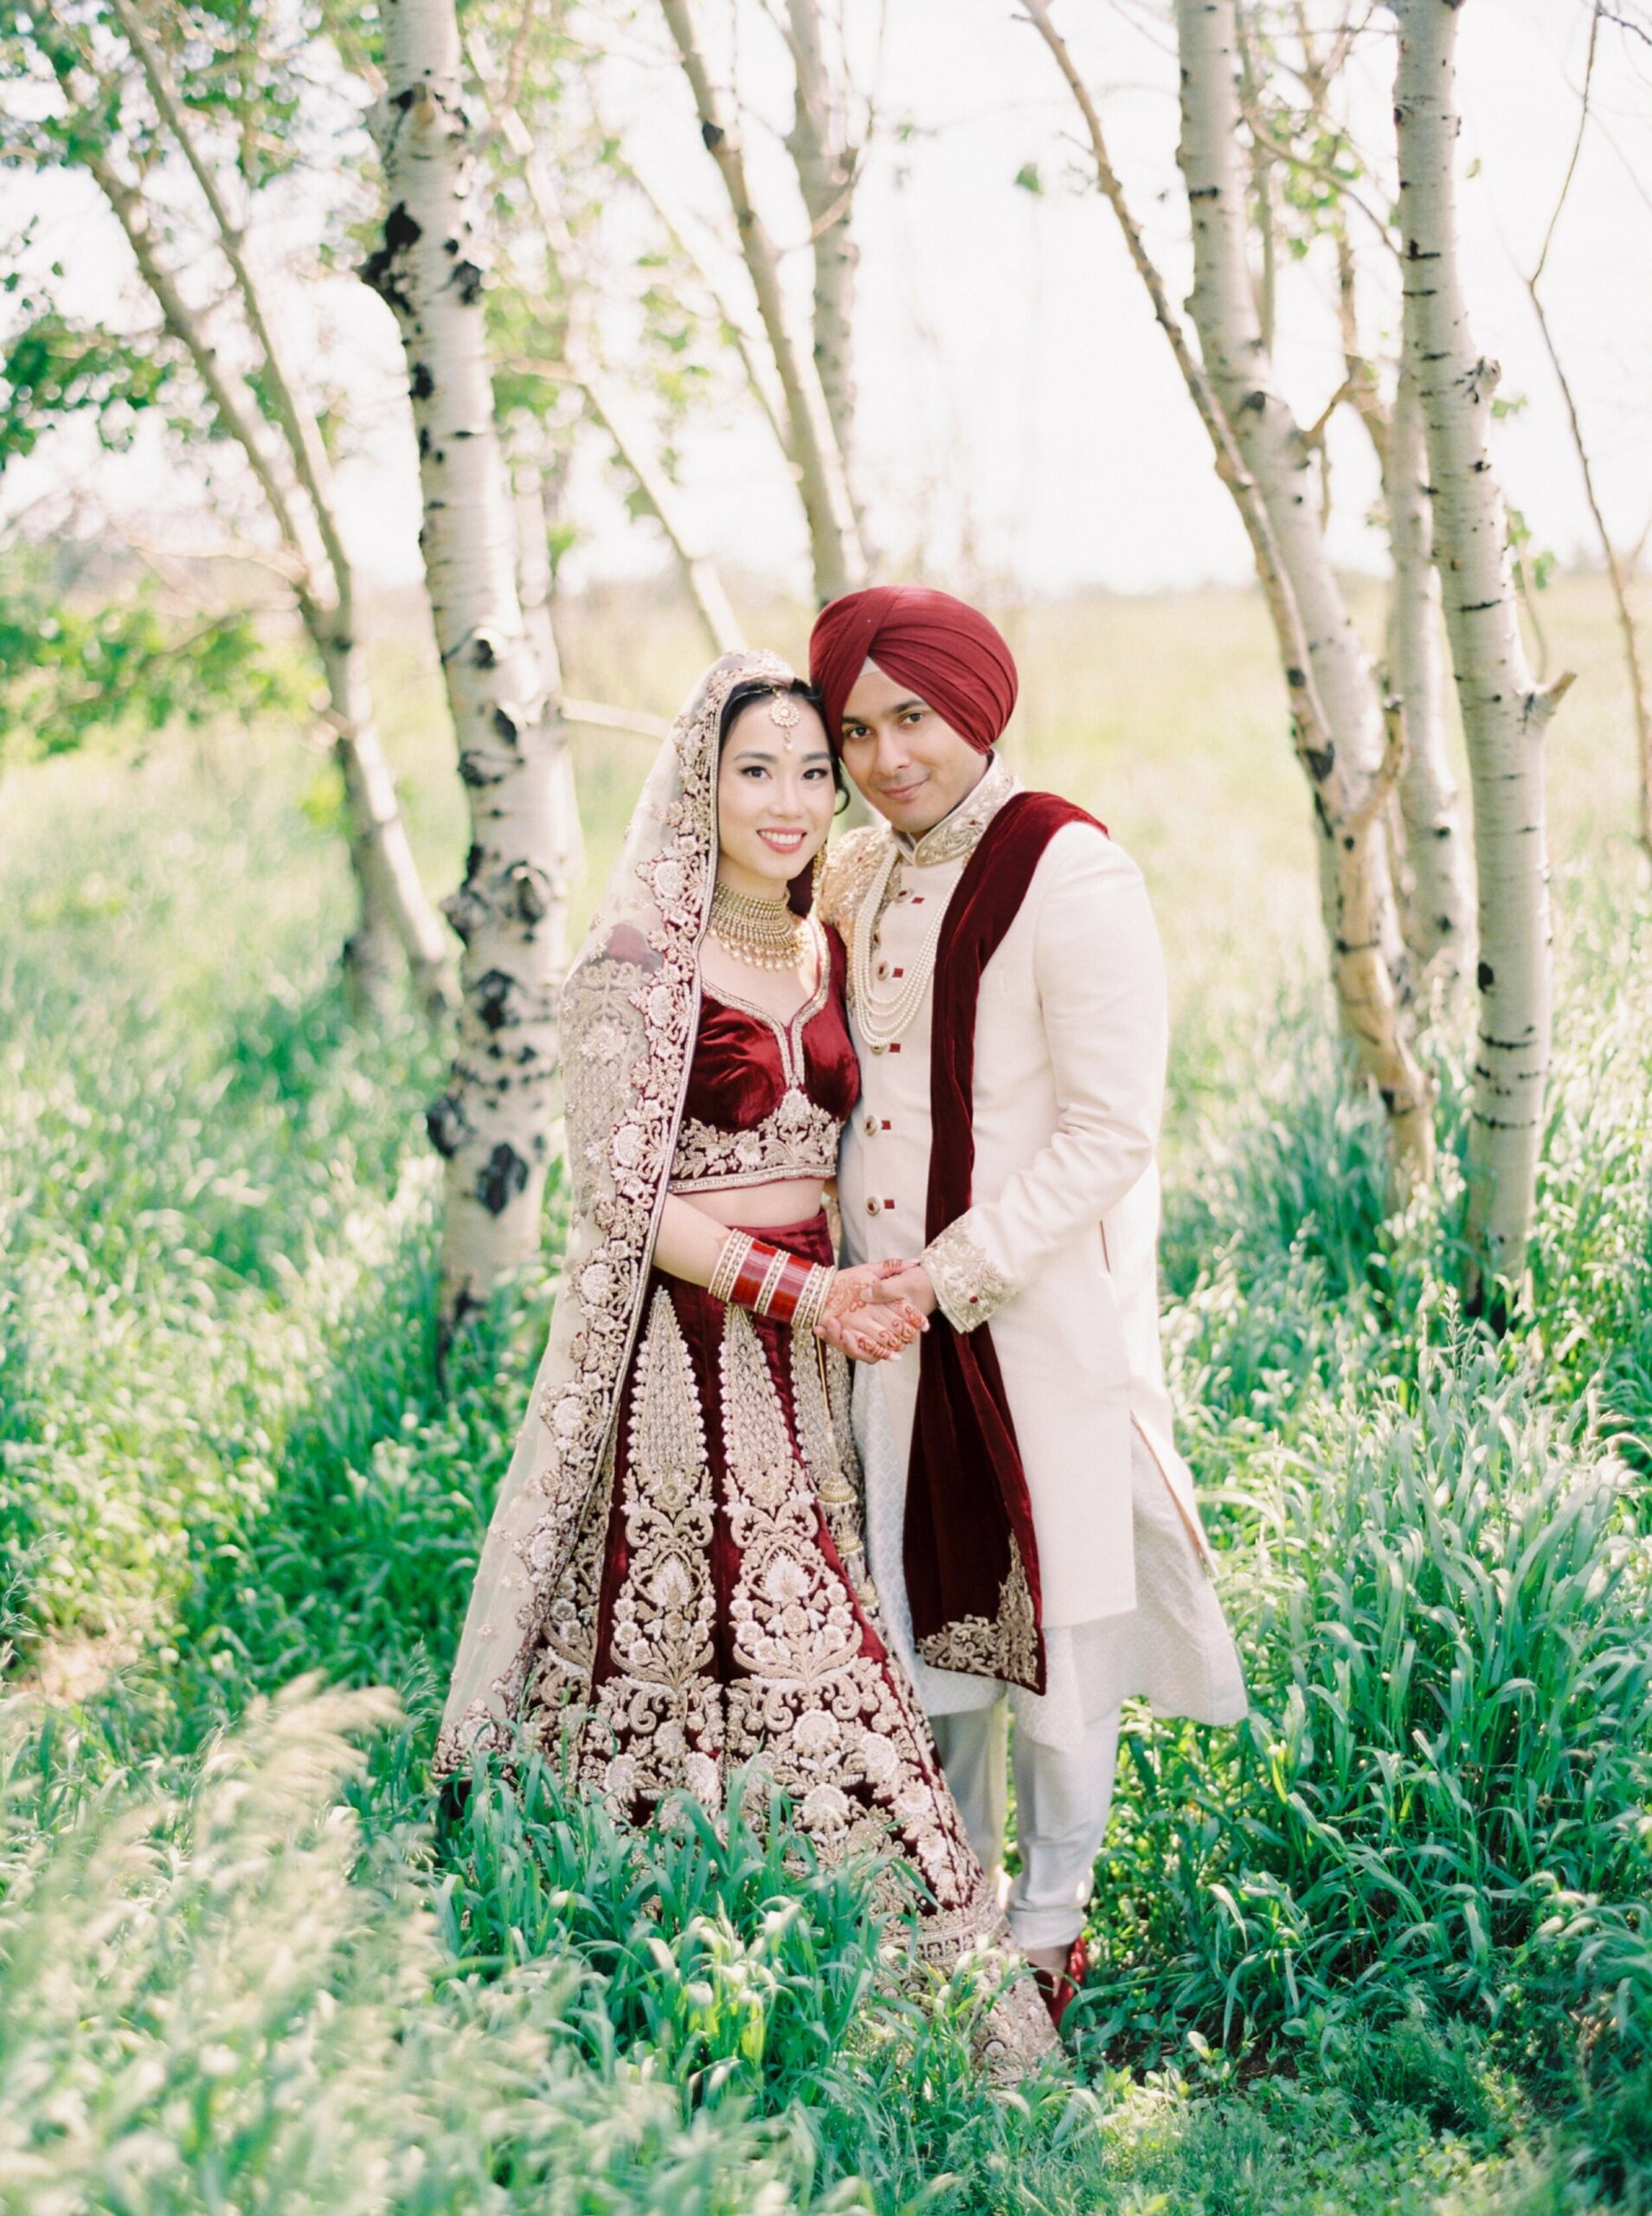  Traditional Sikh wedding couples poses and outfits | Indian Chinese Fusion Wedding | Calgary wedding photographers 